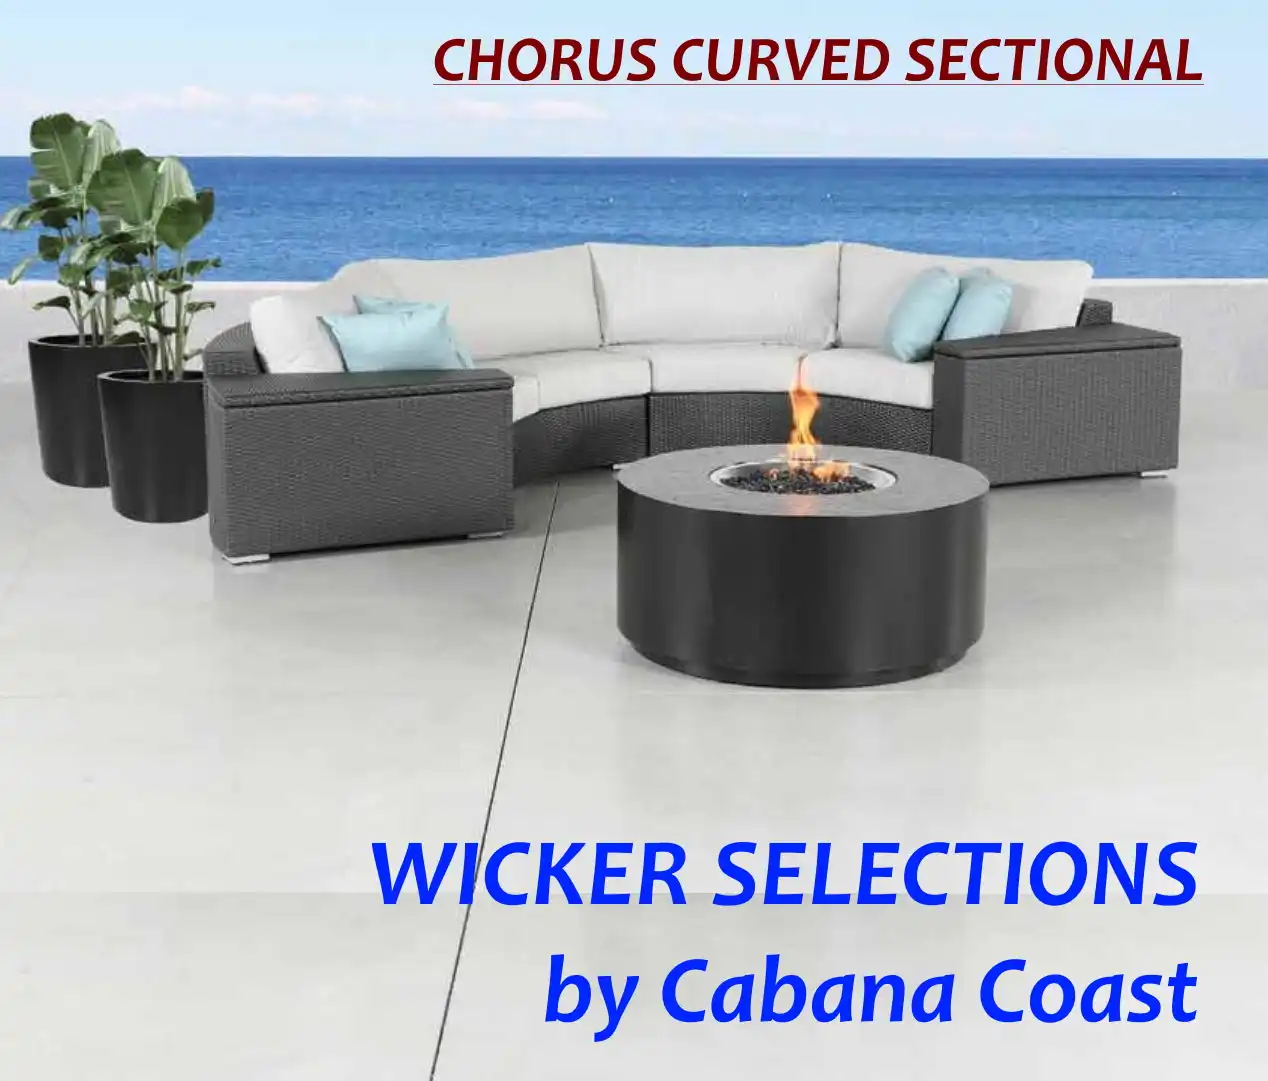 CHORUS CURVED SECTIONAL (Wicker) by Cabana Coast